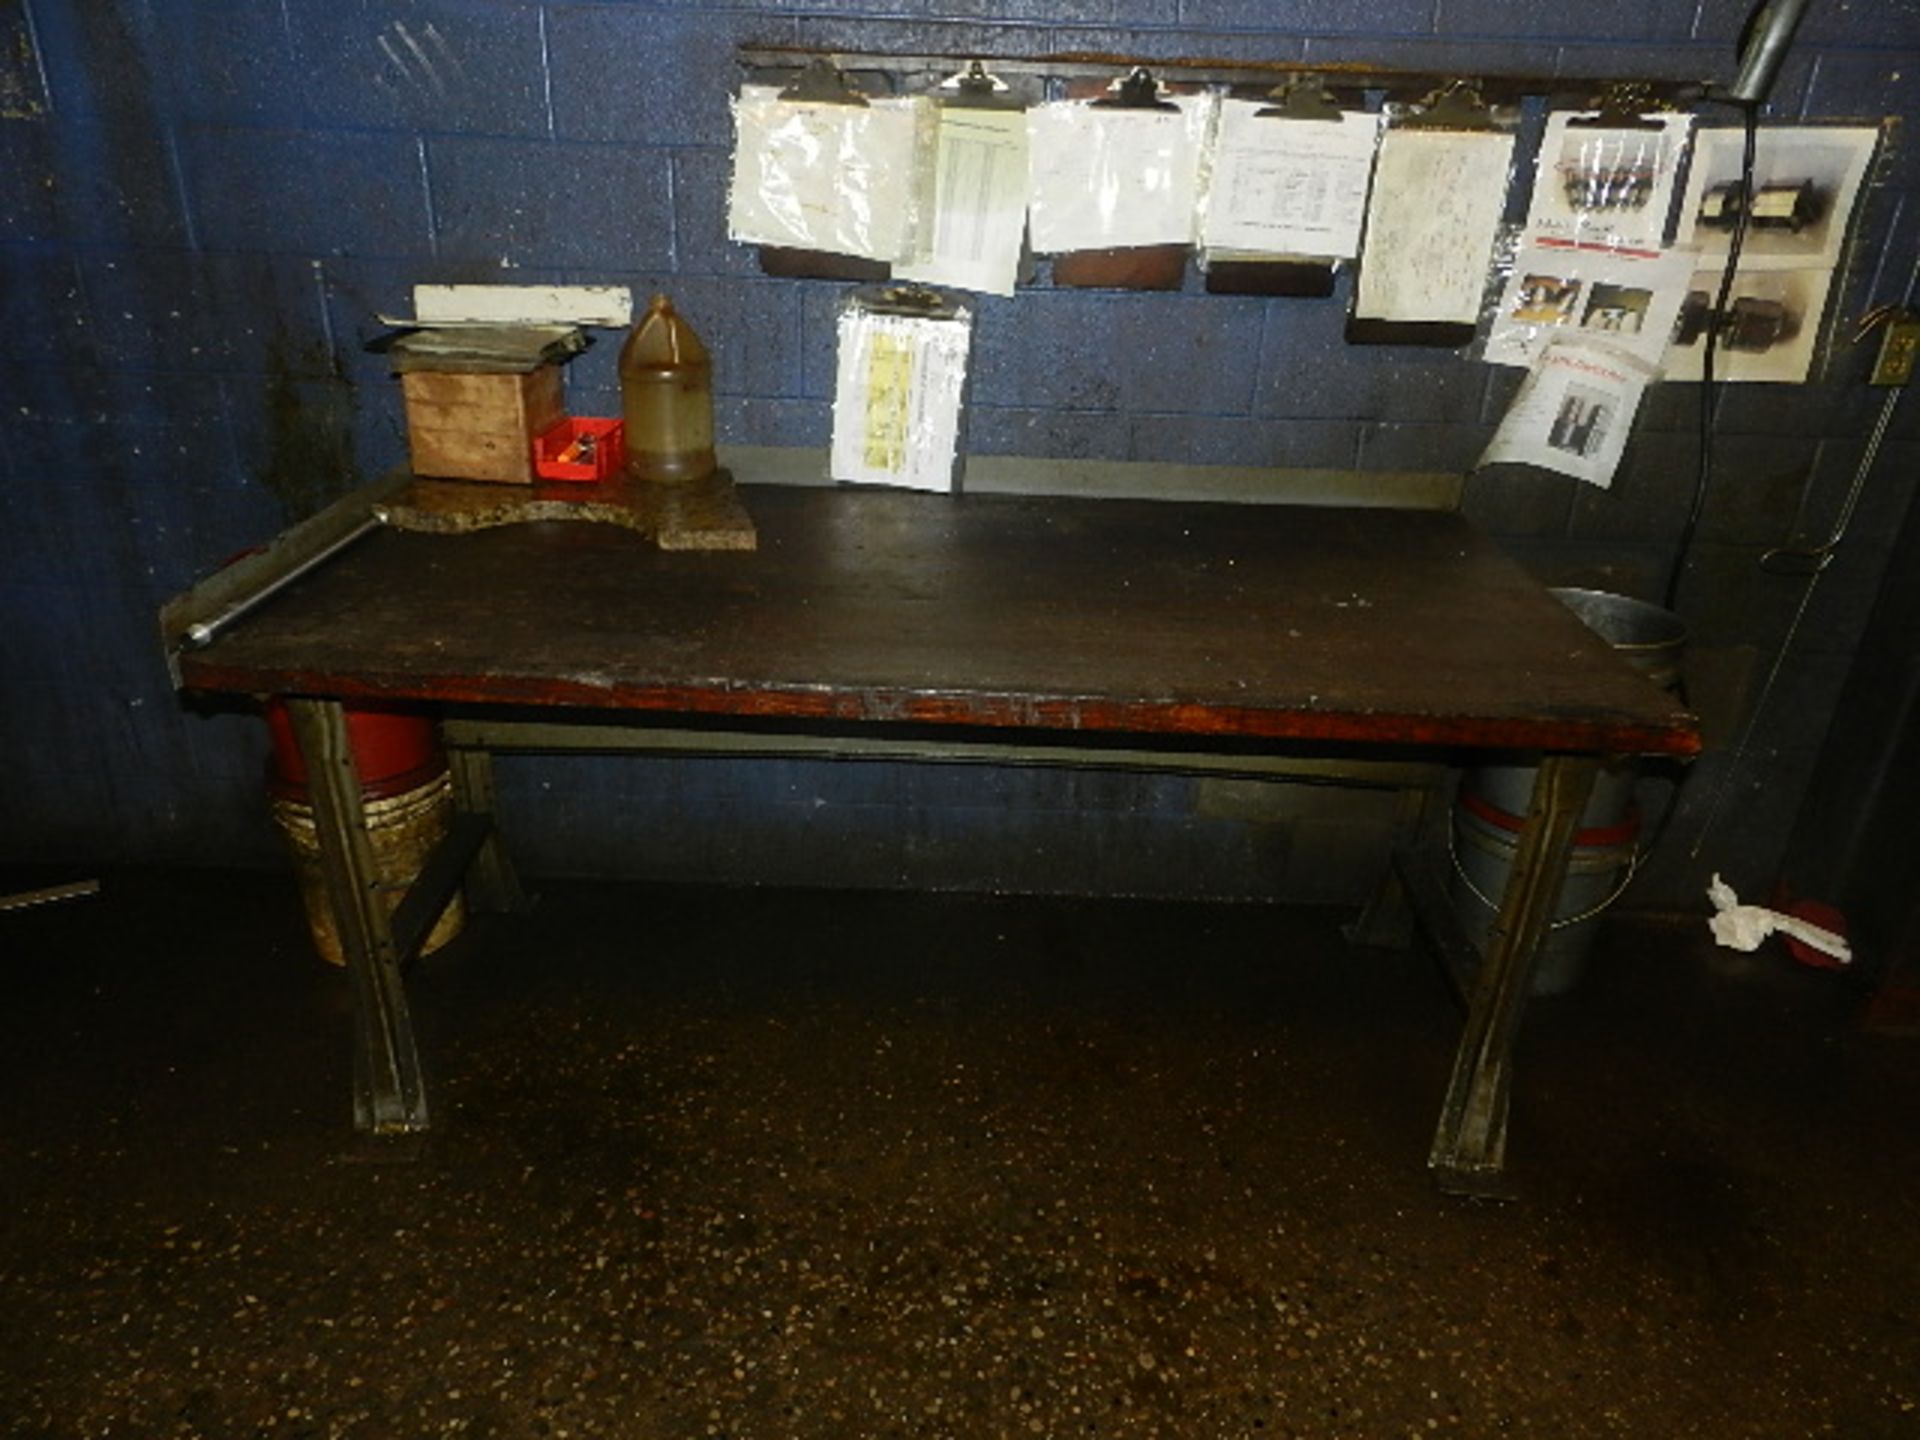 (1) 6' LONG WORK BENCH, (1) 5' LONG WORK BENCH, STOOL, AND CONTENTS ON TABLE (A)